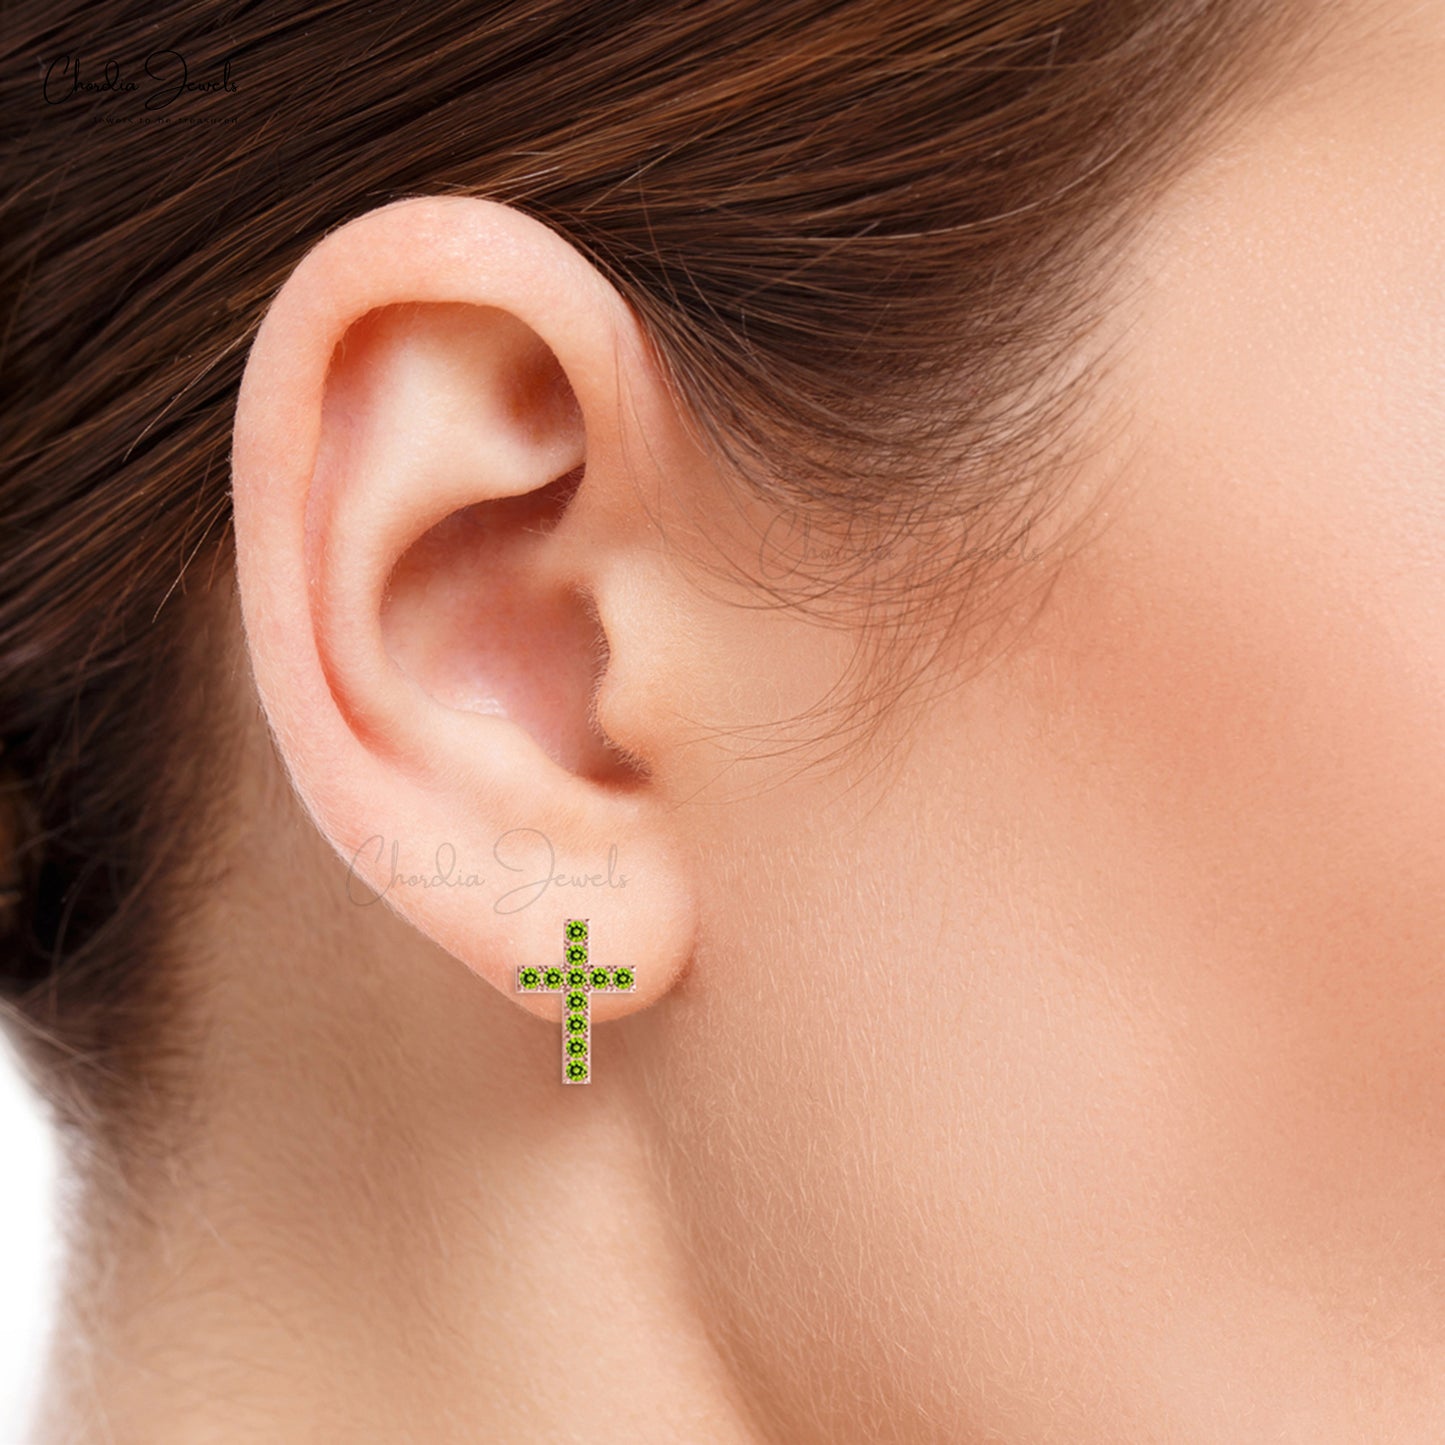 Load image into Gallery viewer, Minimalist Earrings Mini Cross Shaped August Birthstone Natural Green Peridot Stud Earrings Pure 14k Gold Religious Studs Dainty Jewelry For Gift
